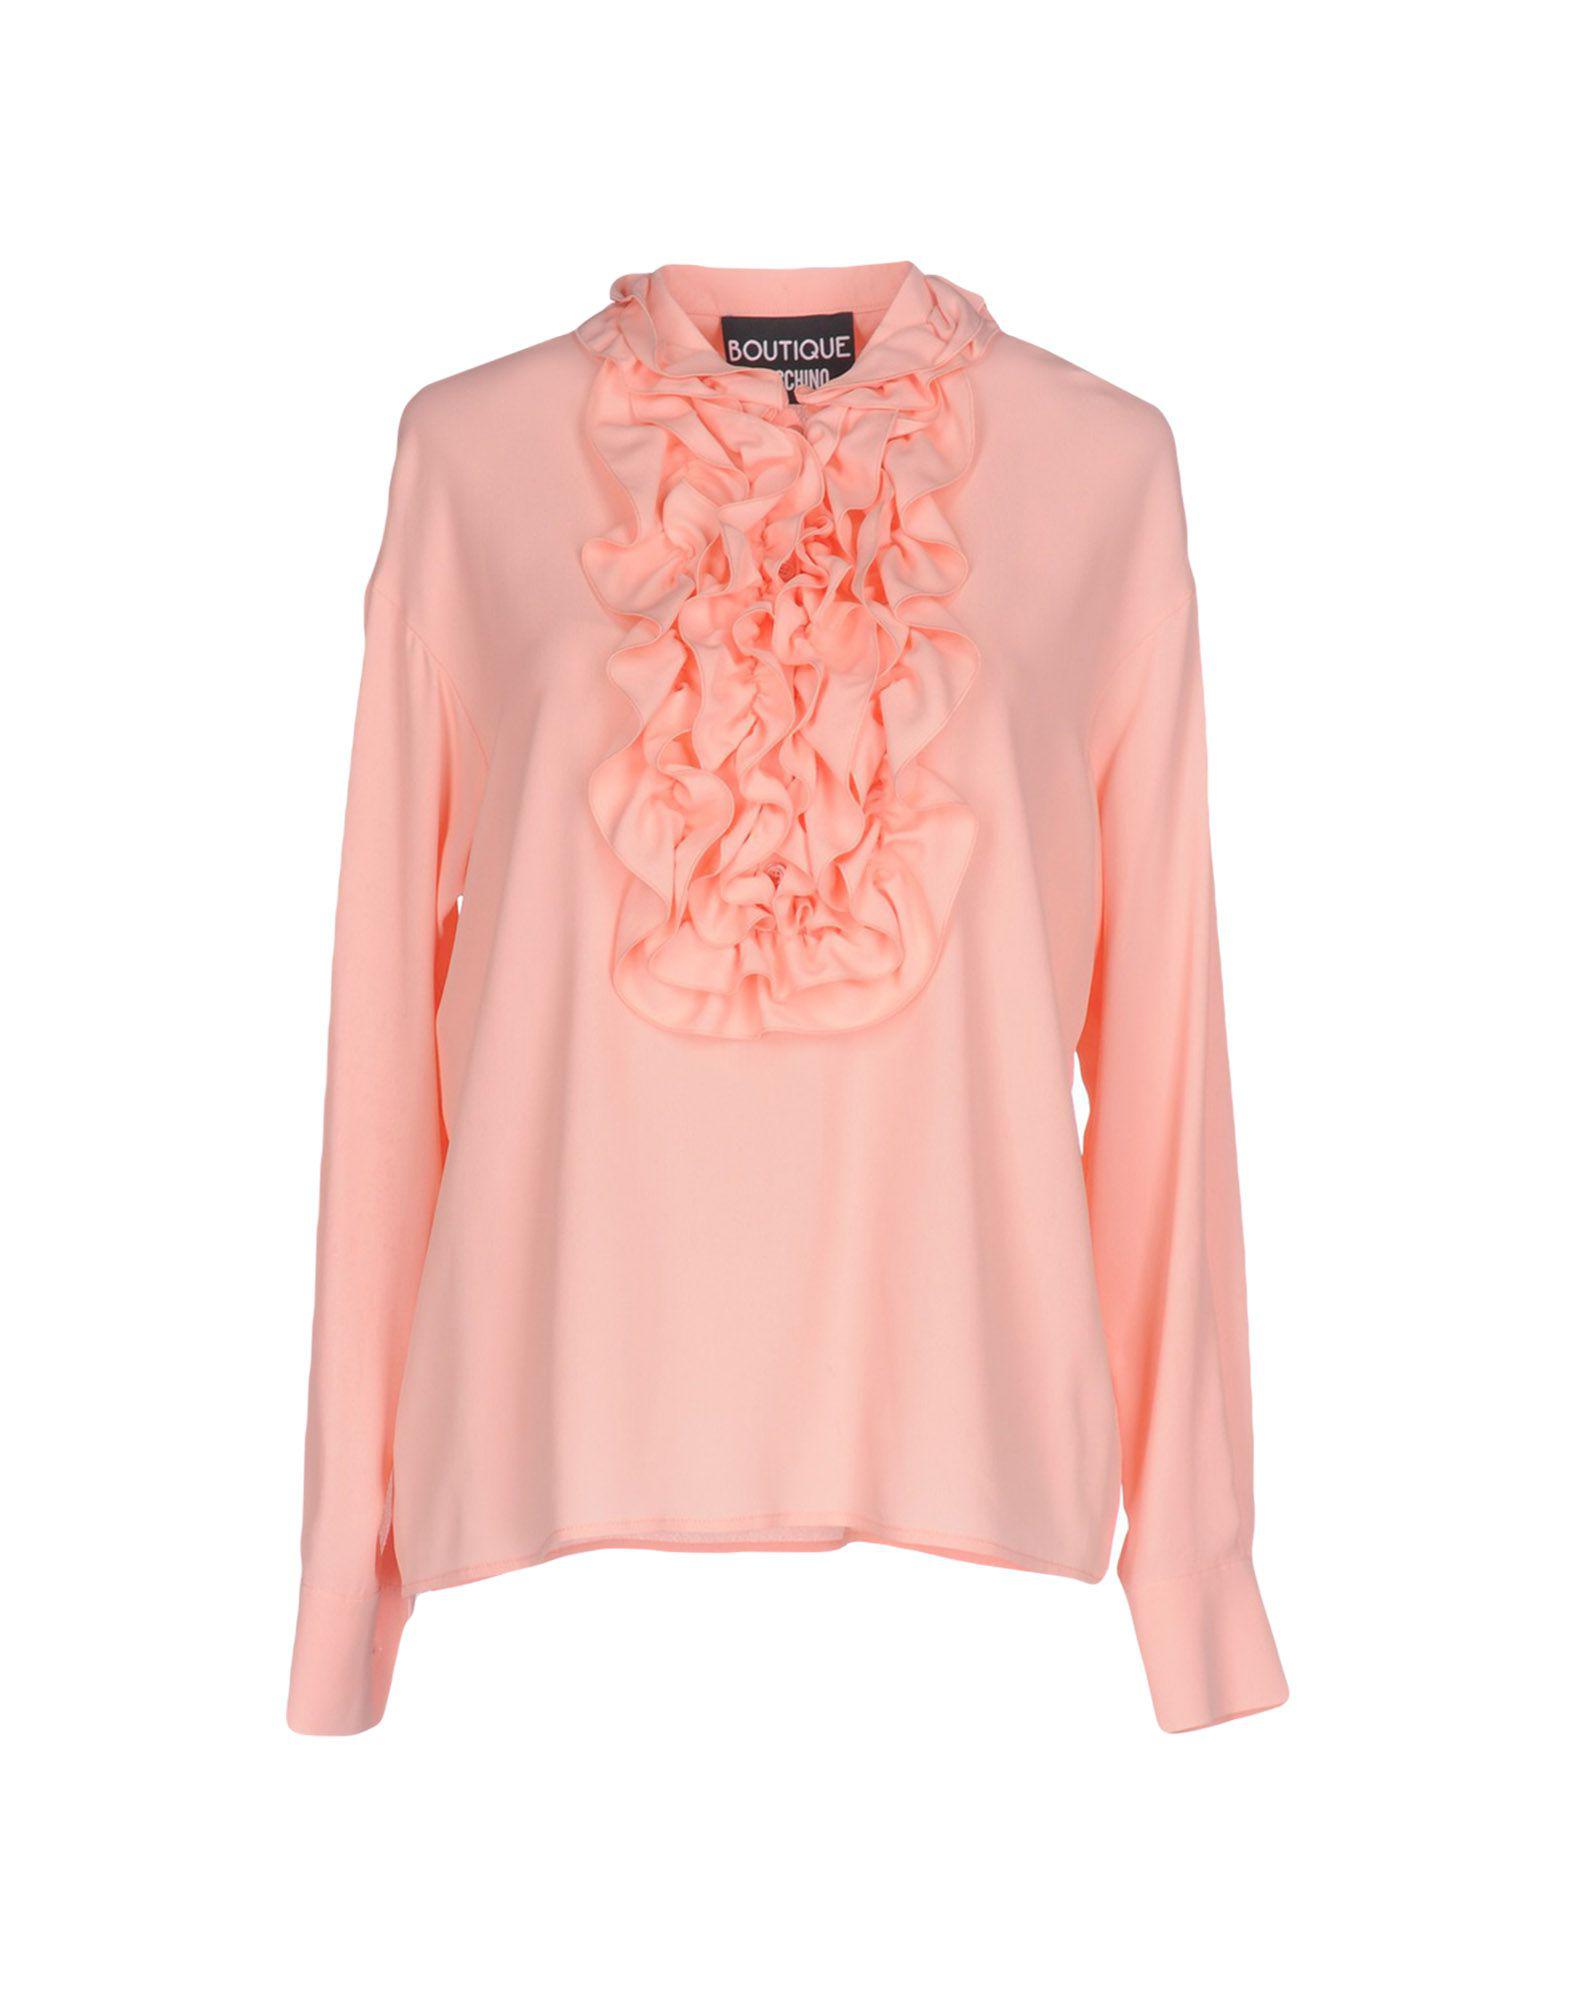 Boutique Moschino Silk Blouse in Pink - Lyst